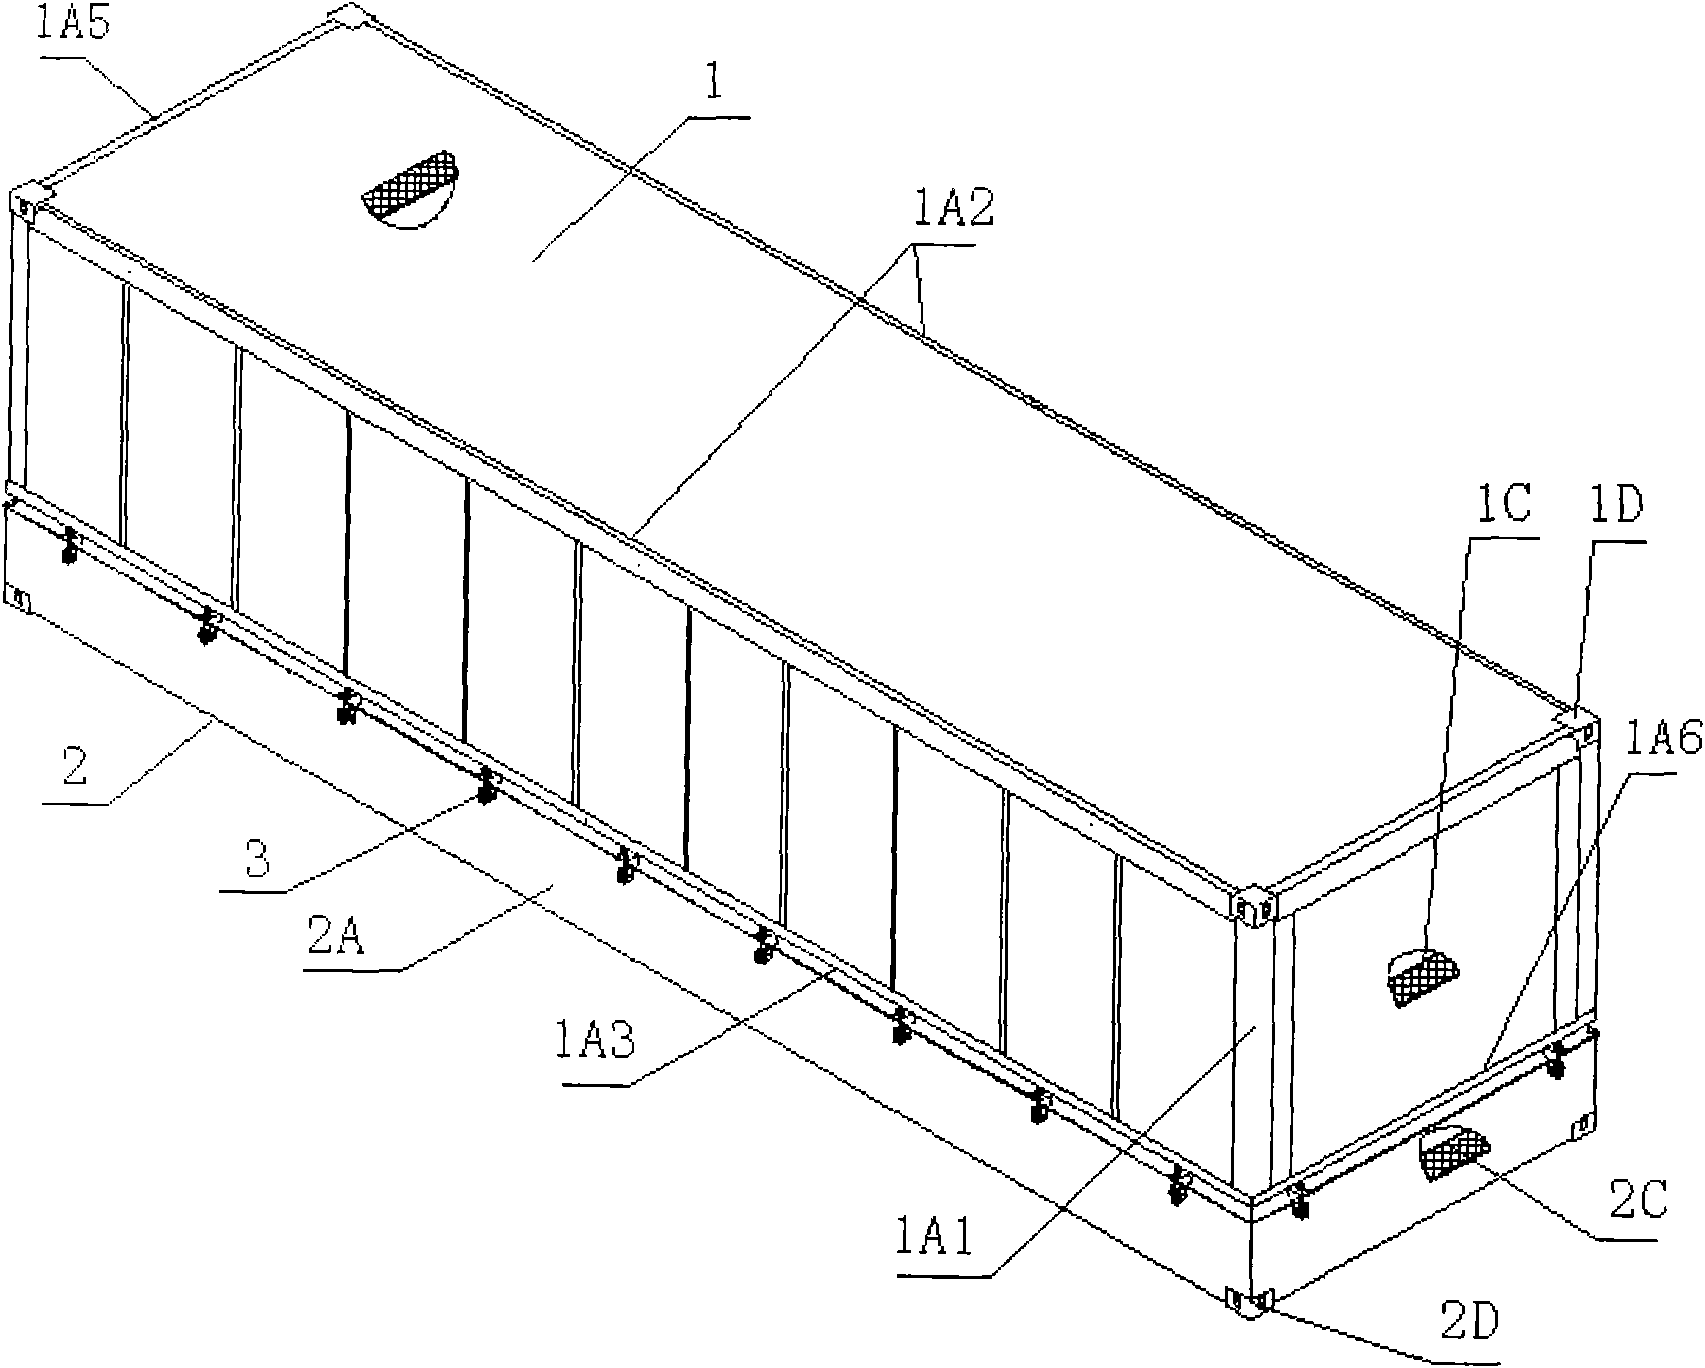 Insulated container body